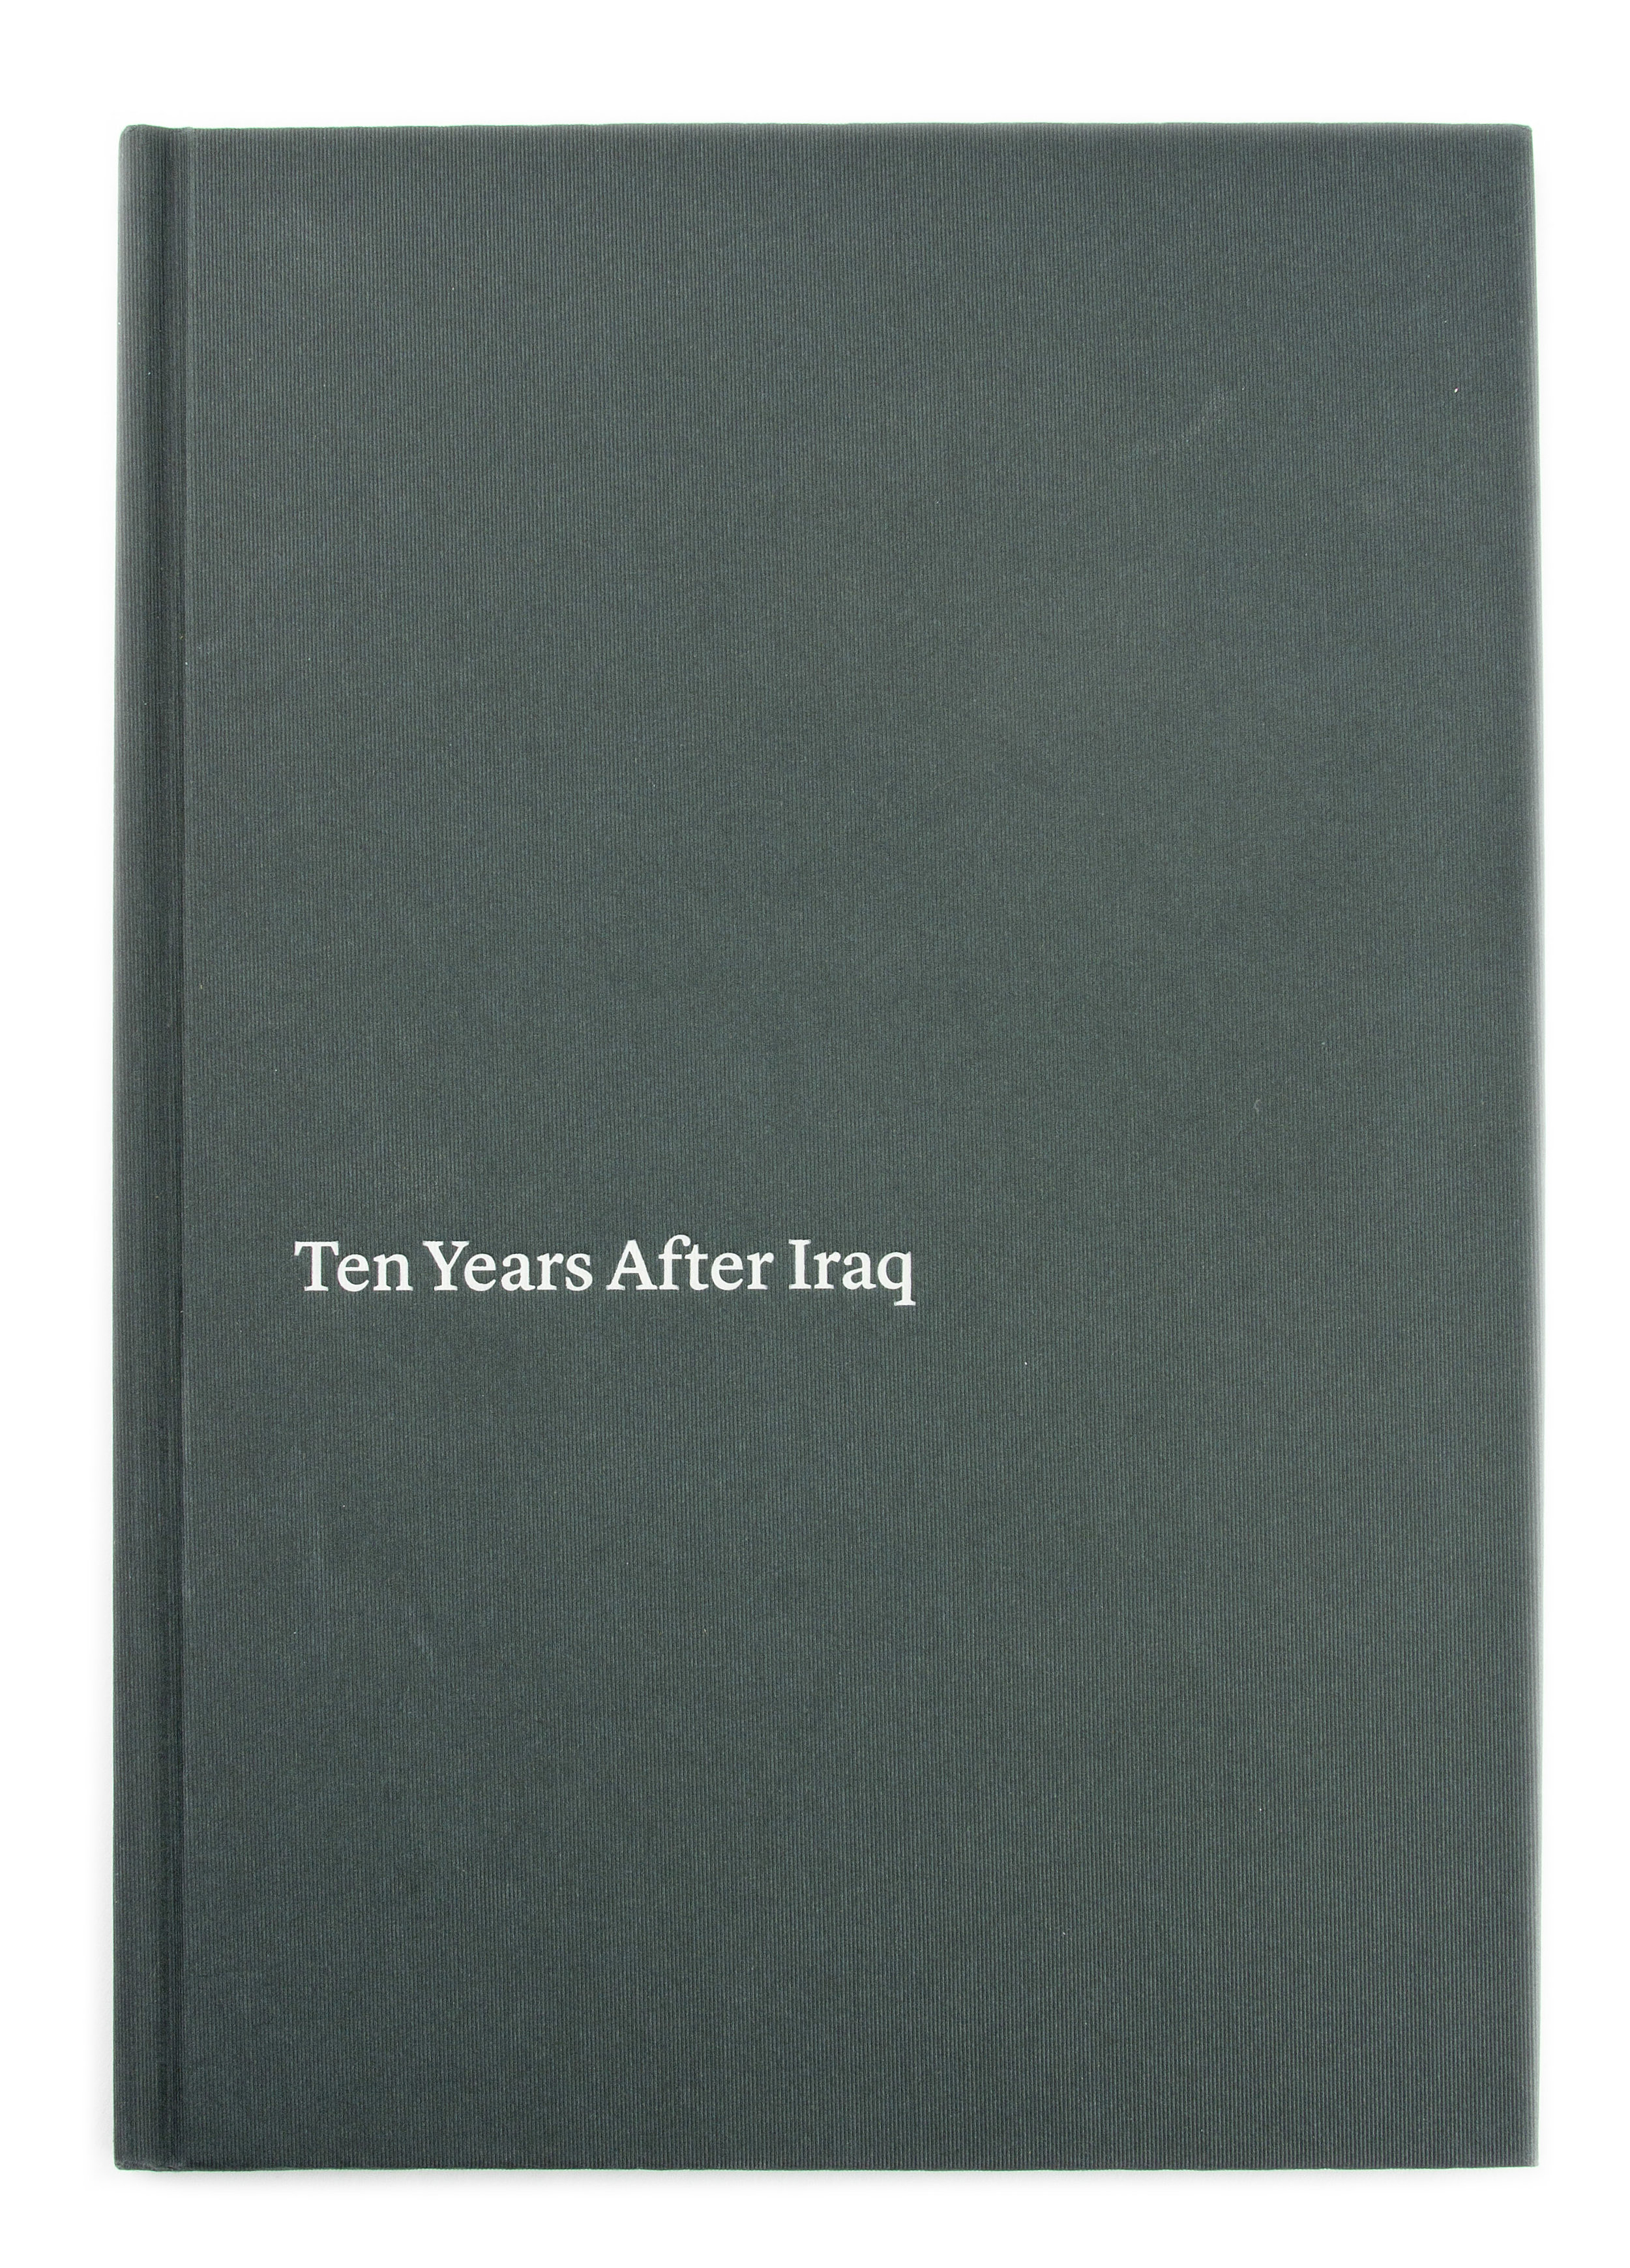 Ten Years After Iraq